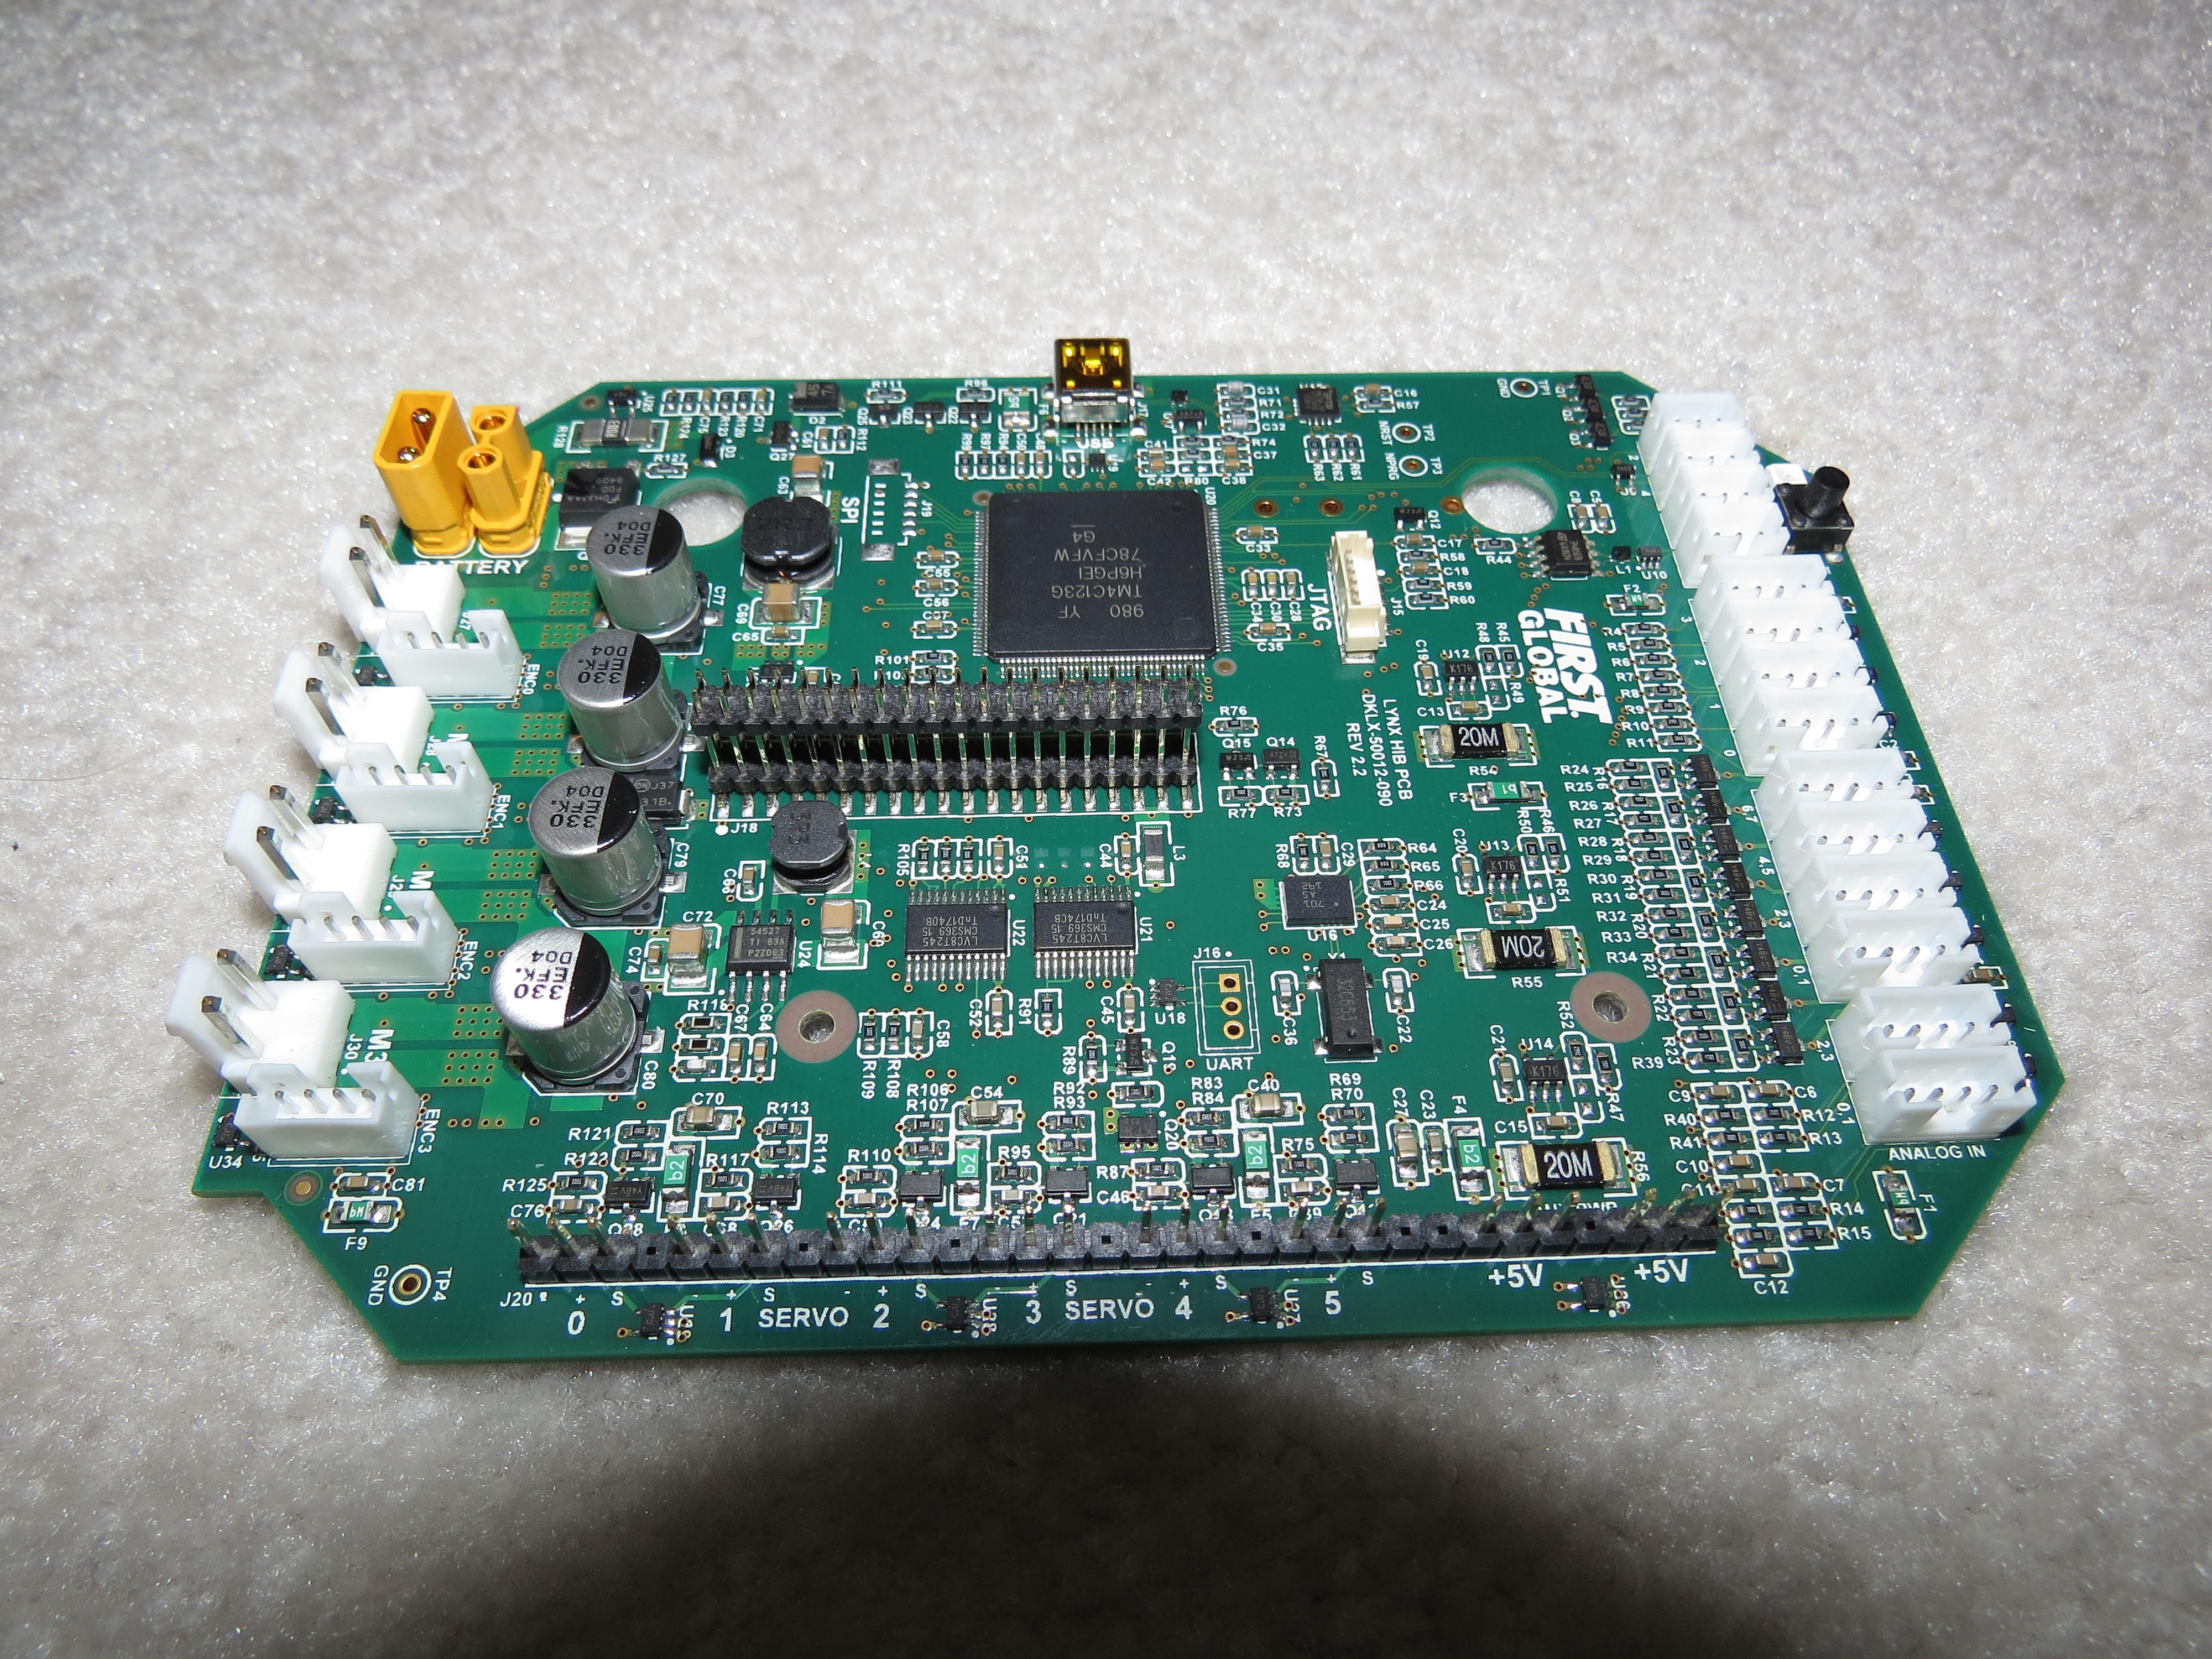 A Lynx board that was removed from its case